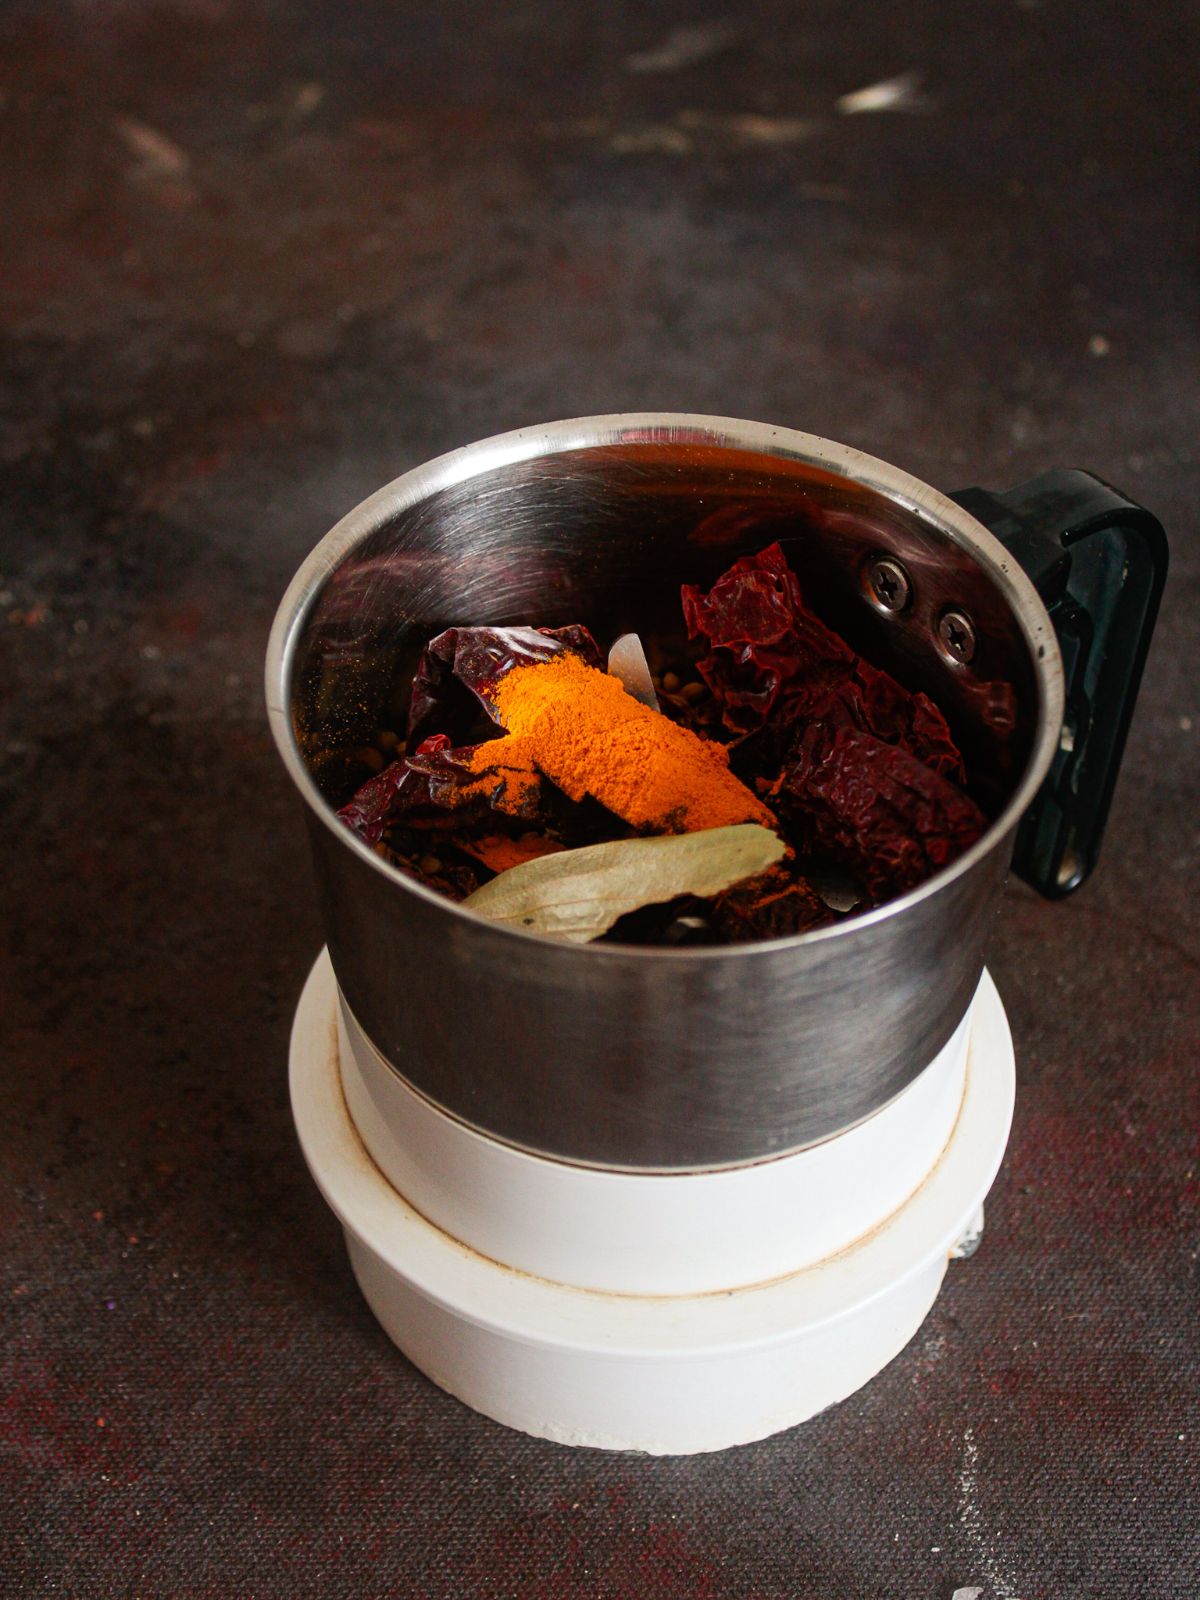 spice grinder filled with roasted spices before grinding